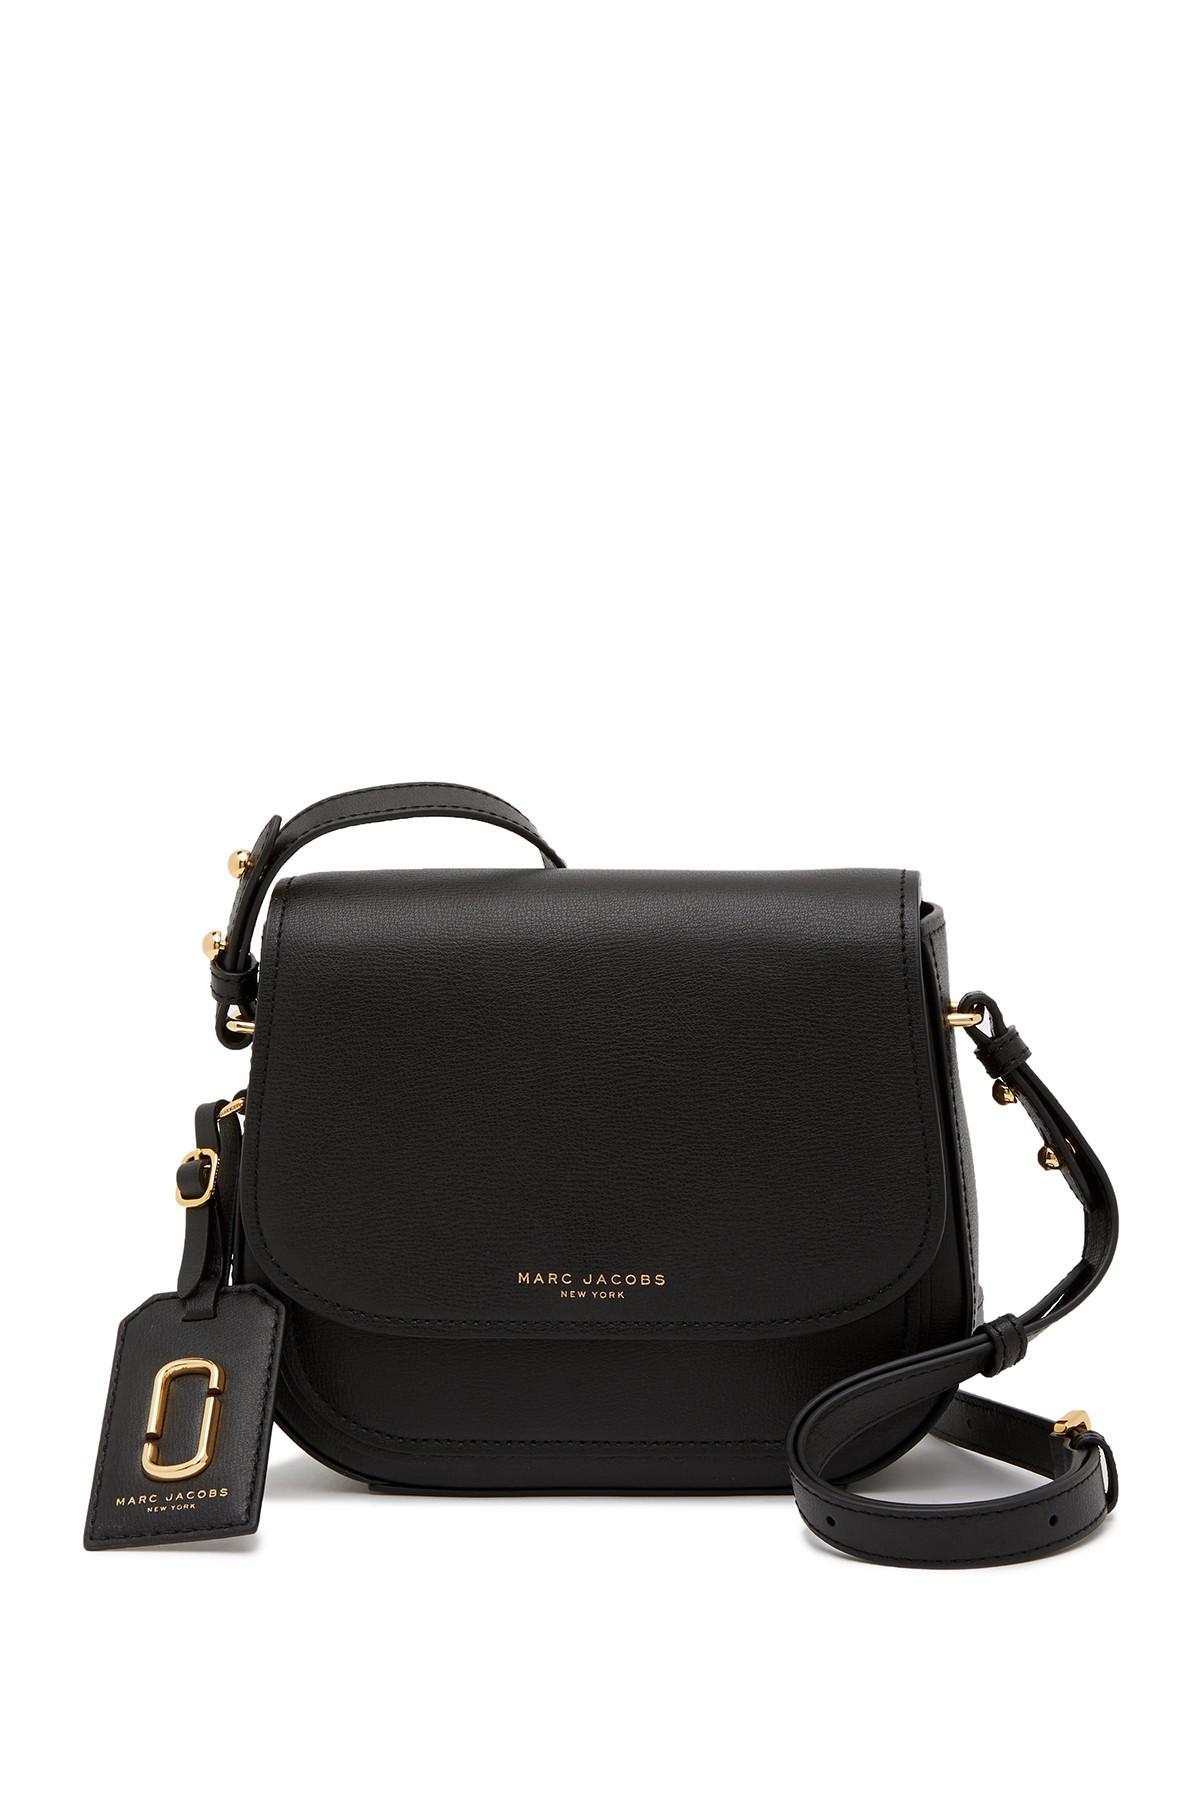 Marc Jacobs Rider Mini Top Handle Leather Crossbody Bag in Natural